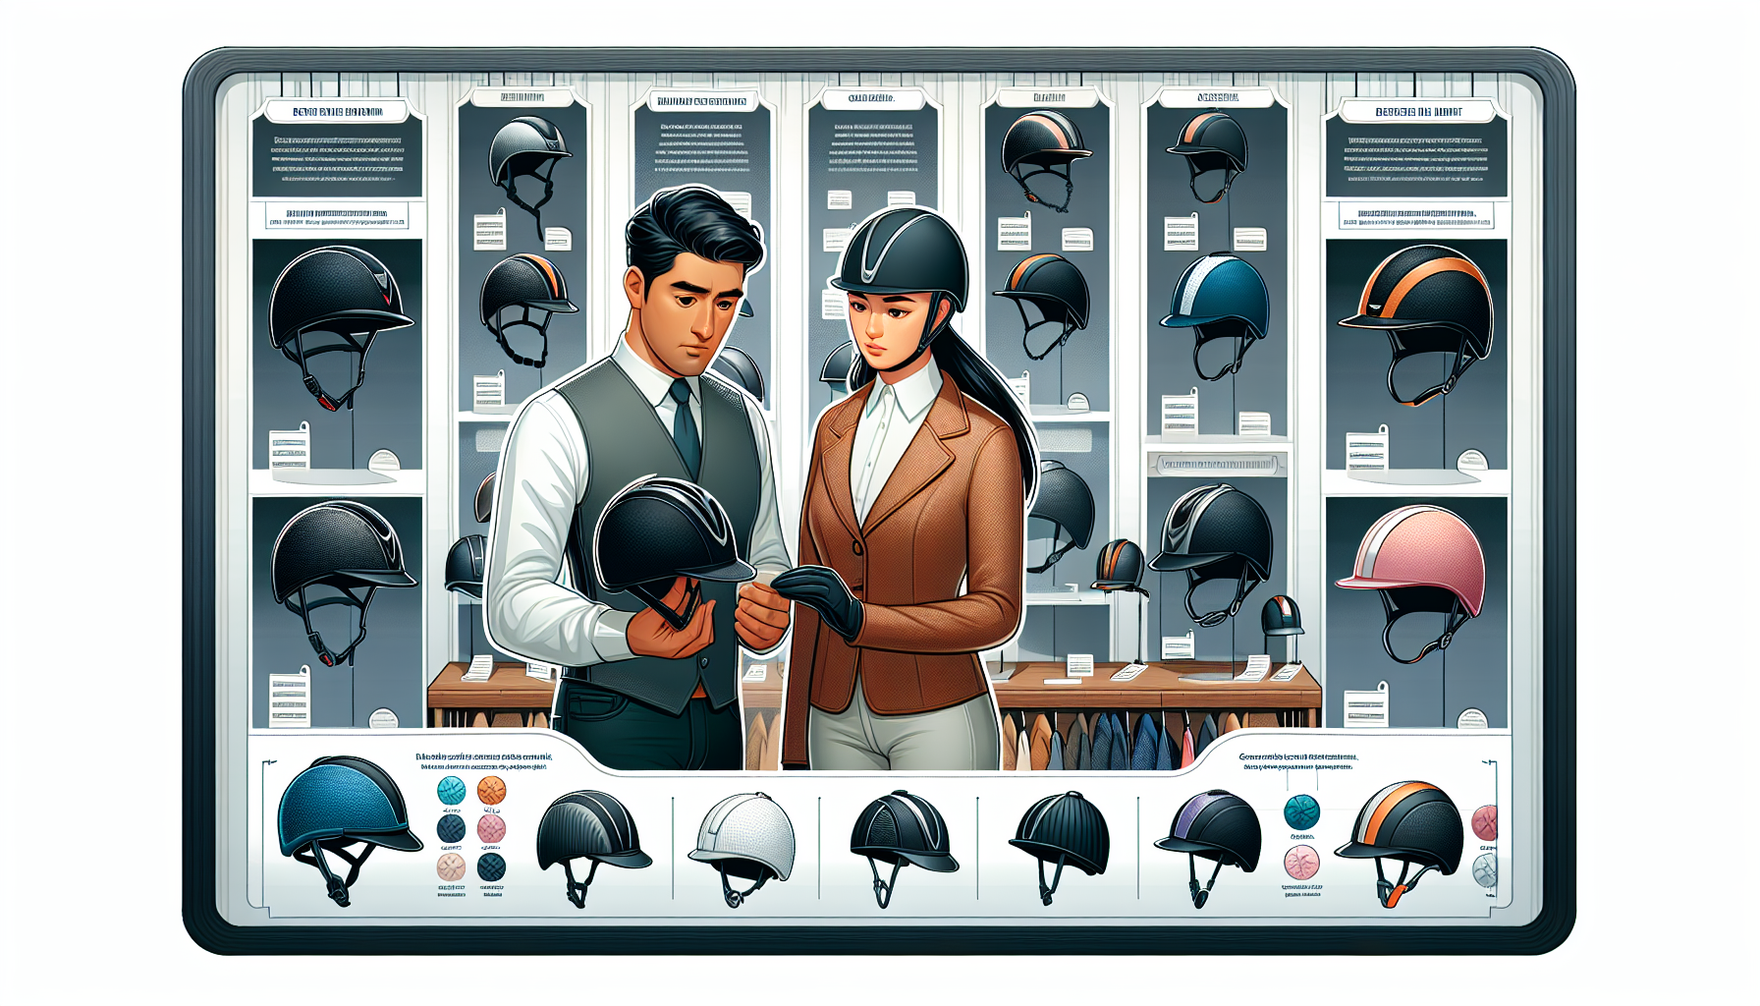 An informative illustration about choosing the perfect equestrian helmet. The image will show a variety of helmet styles that blend safety and fashion. It will include helmets designed for differing r